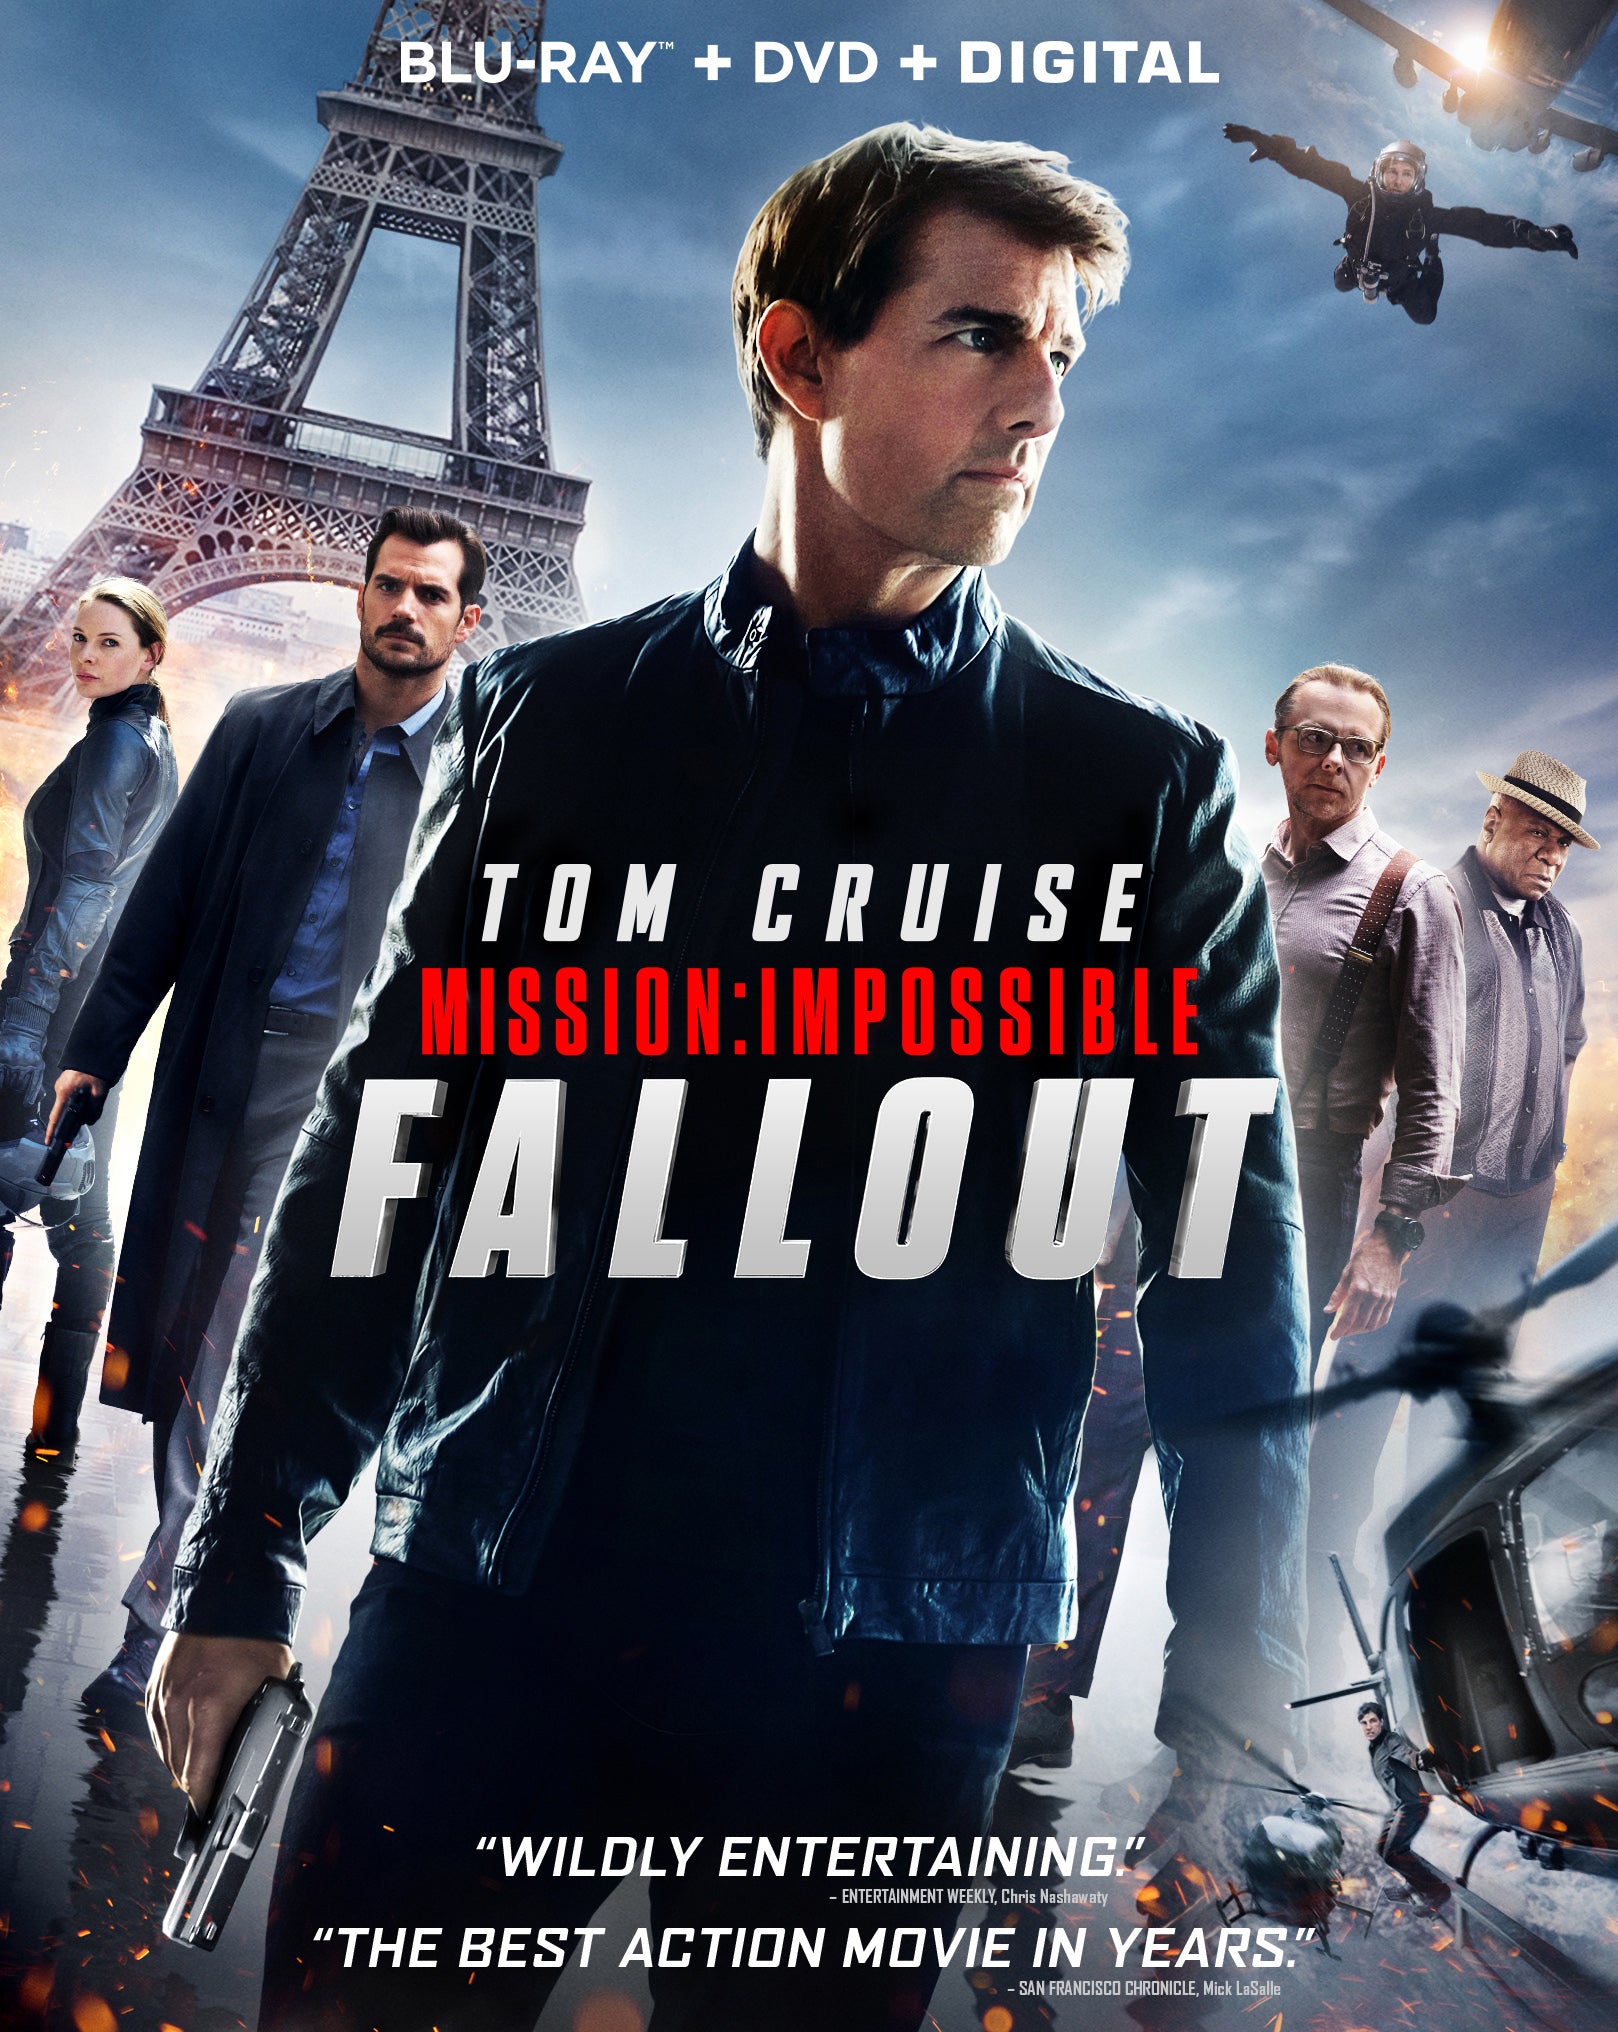 Mission: Impossible - Fallout [Includes Digital Copy] [Blu-ray/DVD] cover art